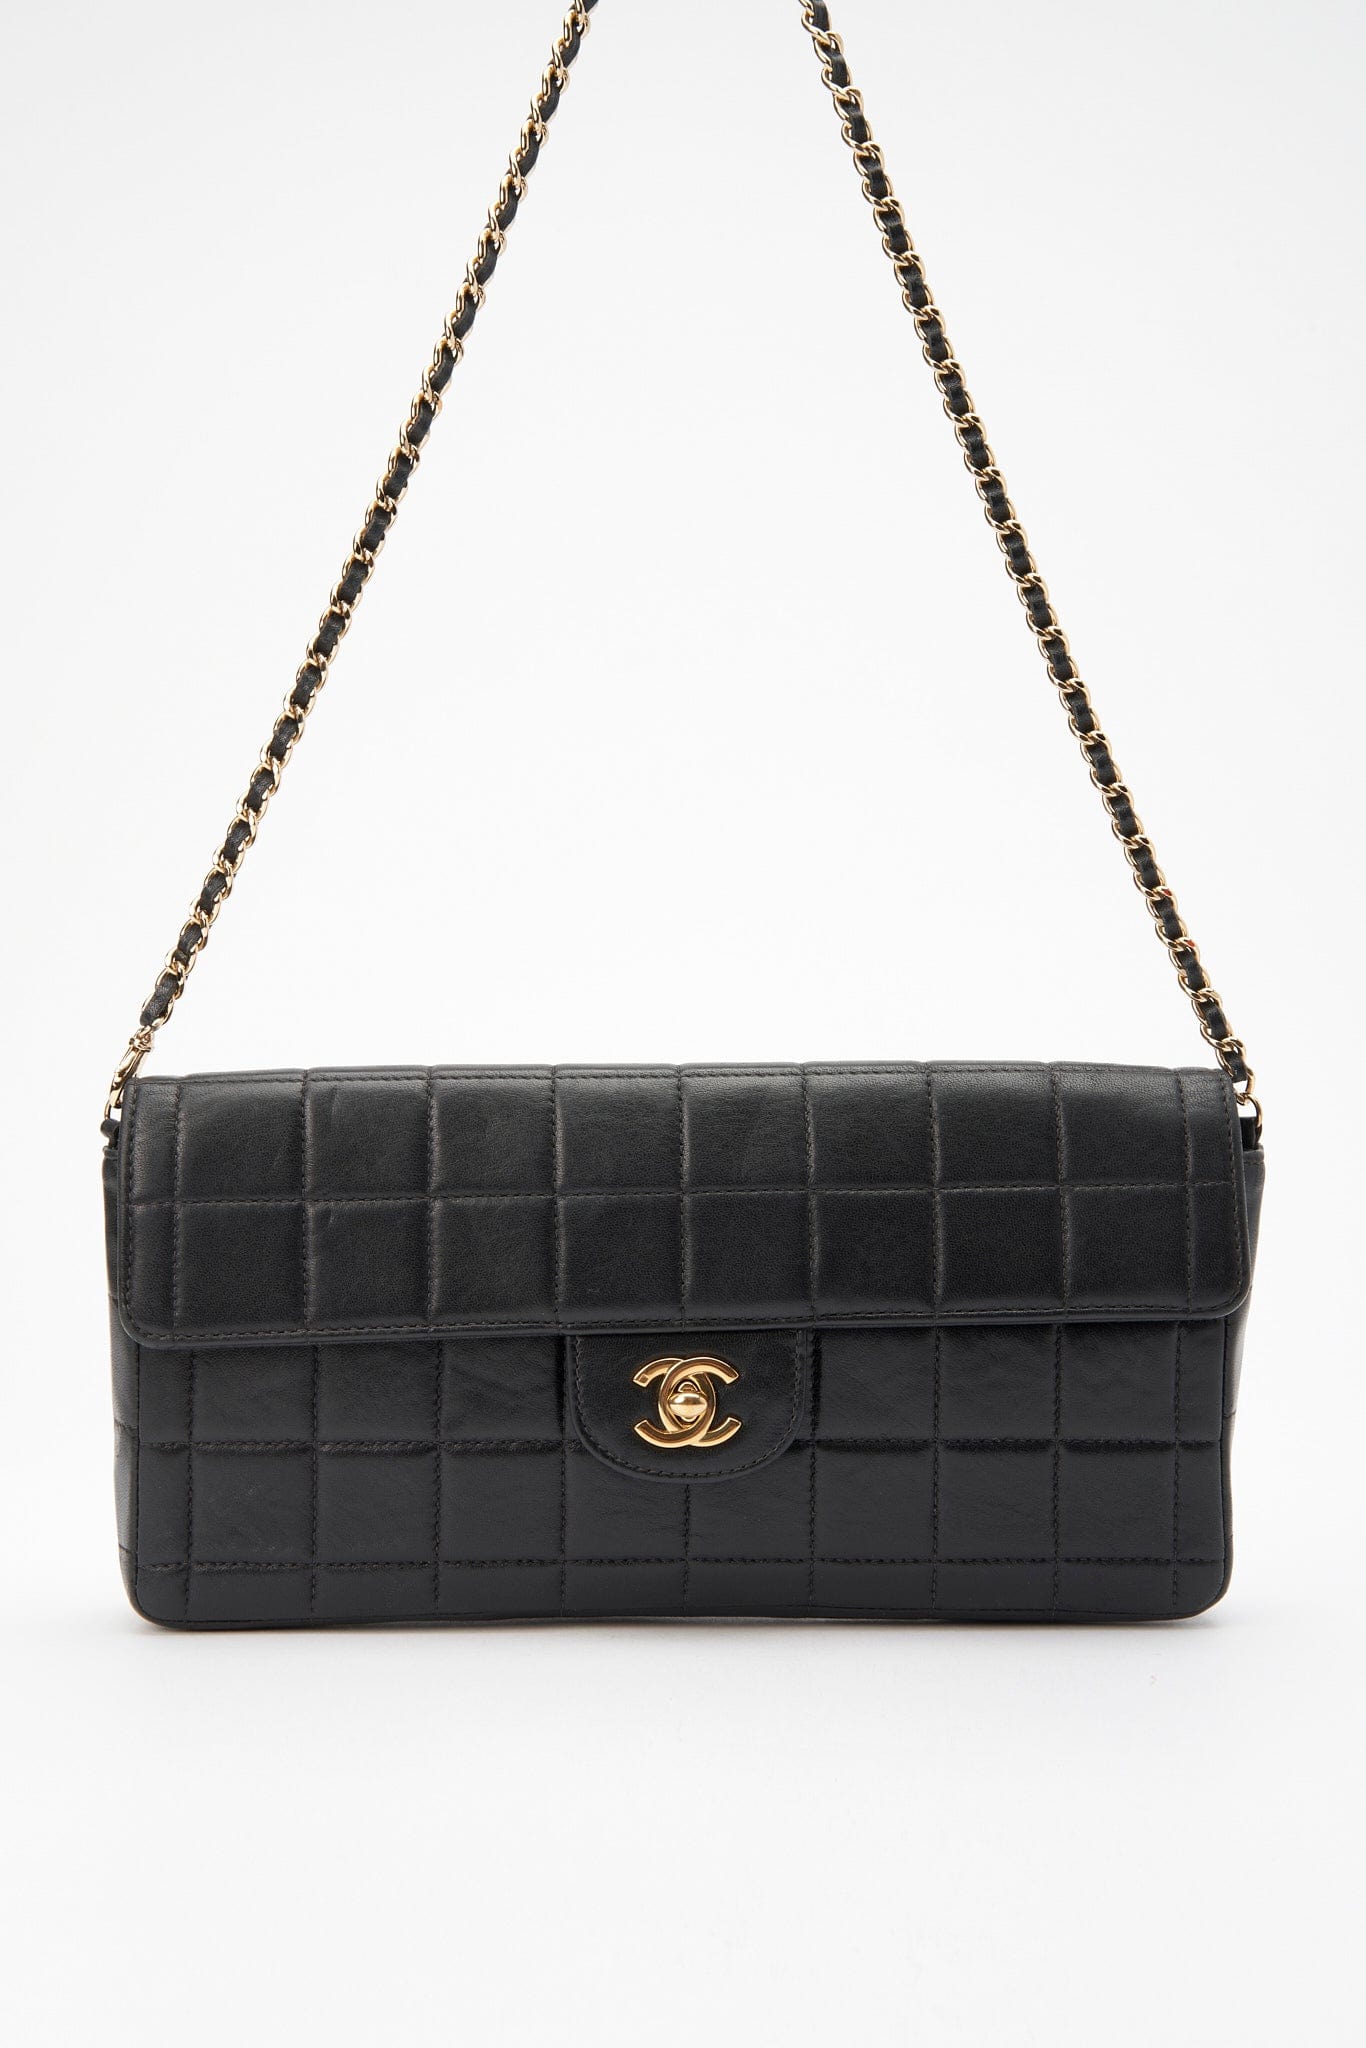 Chanel Black leather Chocolate Bar Flap Bag With 24K Gold Plated Hardware